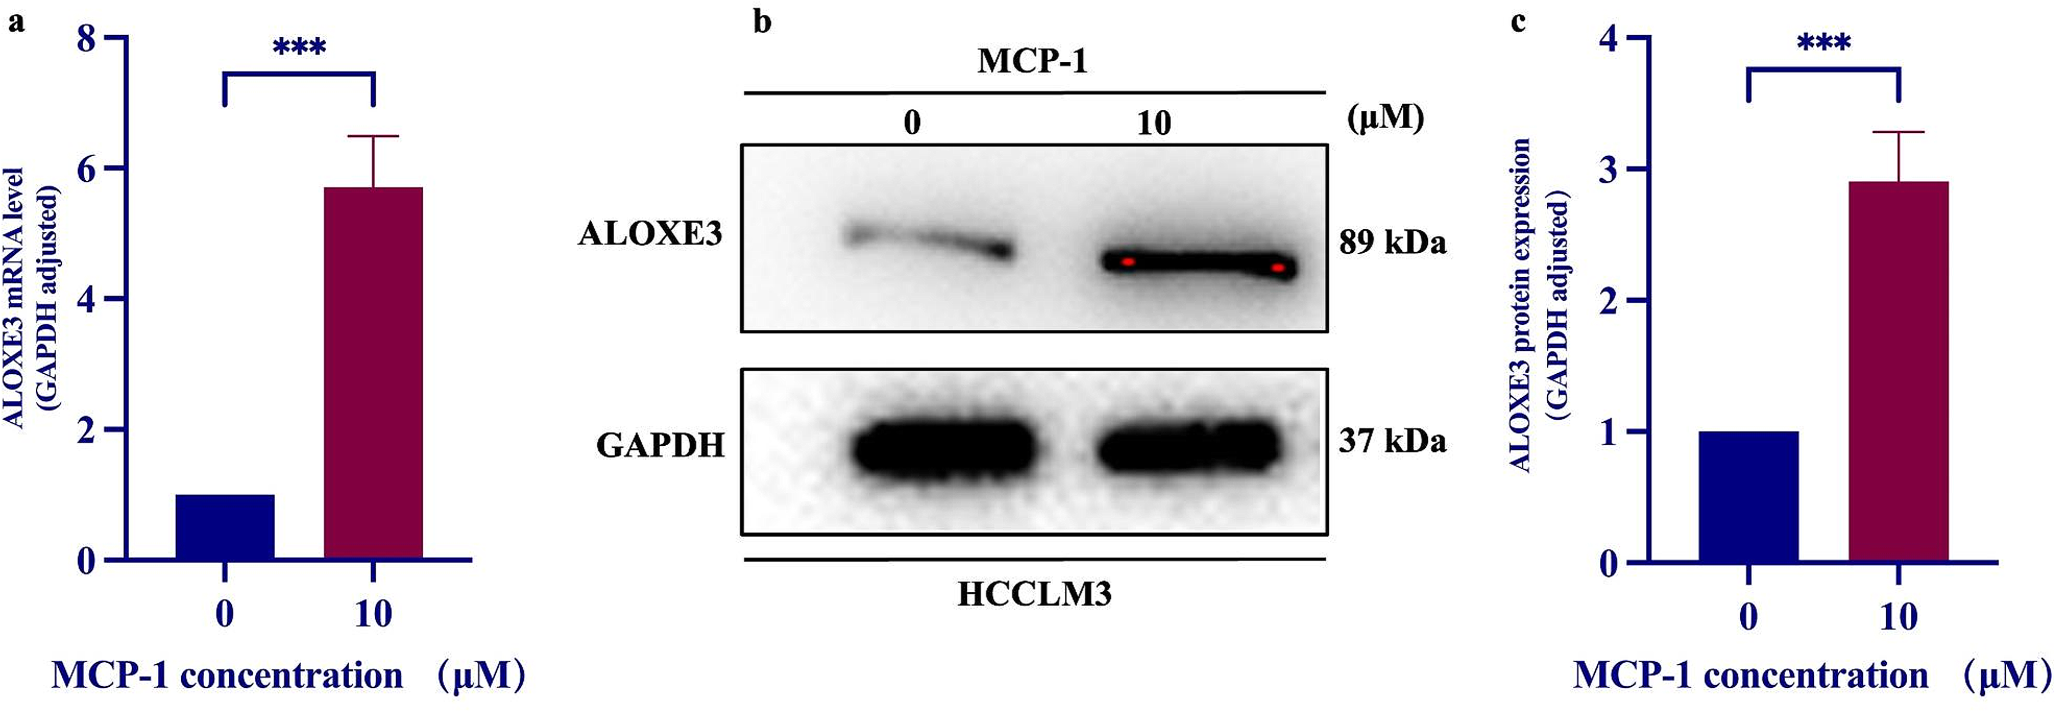 Anticancer Peptide MCP-1 Induces Ferroptosis in Liver Cancer HCCLM3 Cells by Targeting FOXM1/ALOXE3 Signal Pathway